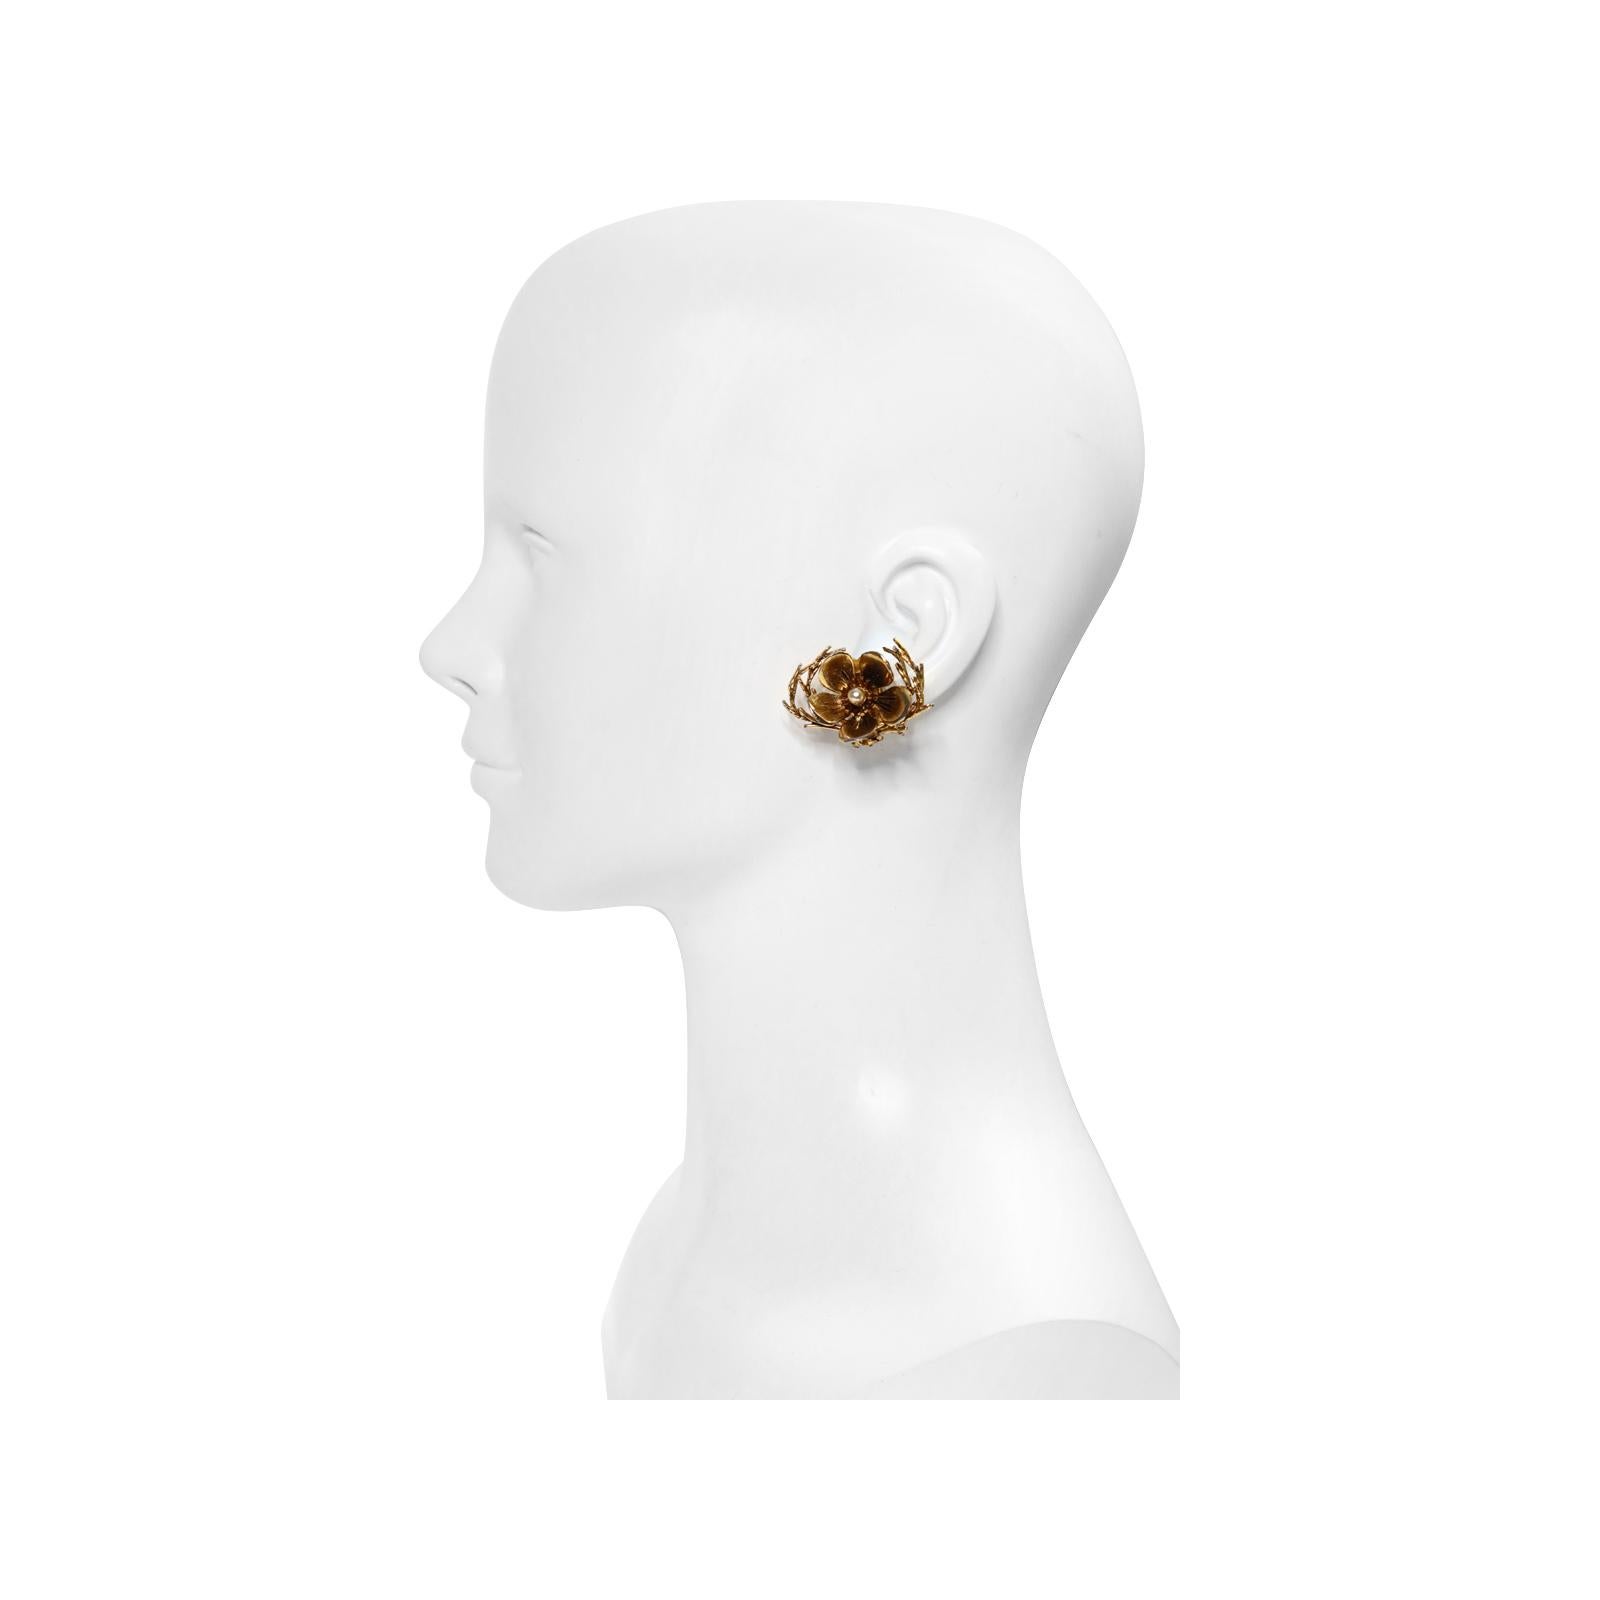 Vintage Christian Dior Boutique Gold Flower with Faux Pearl, circa 1964 In Good Condition For Sale In New York, NY